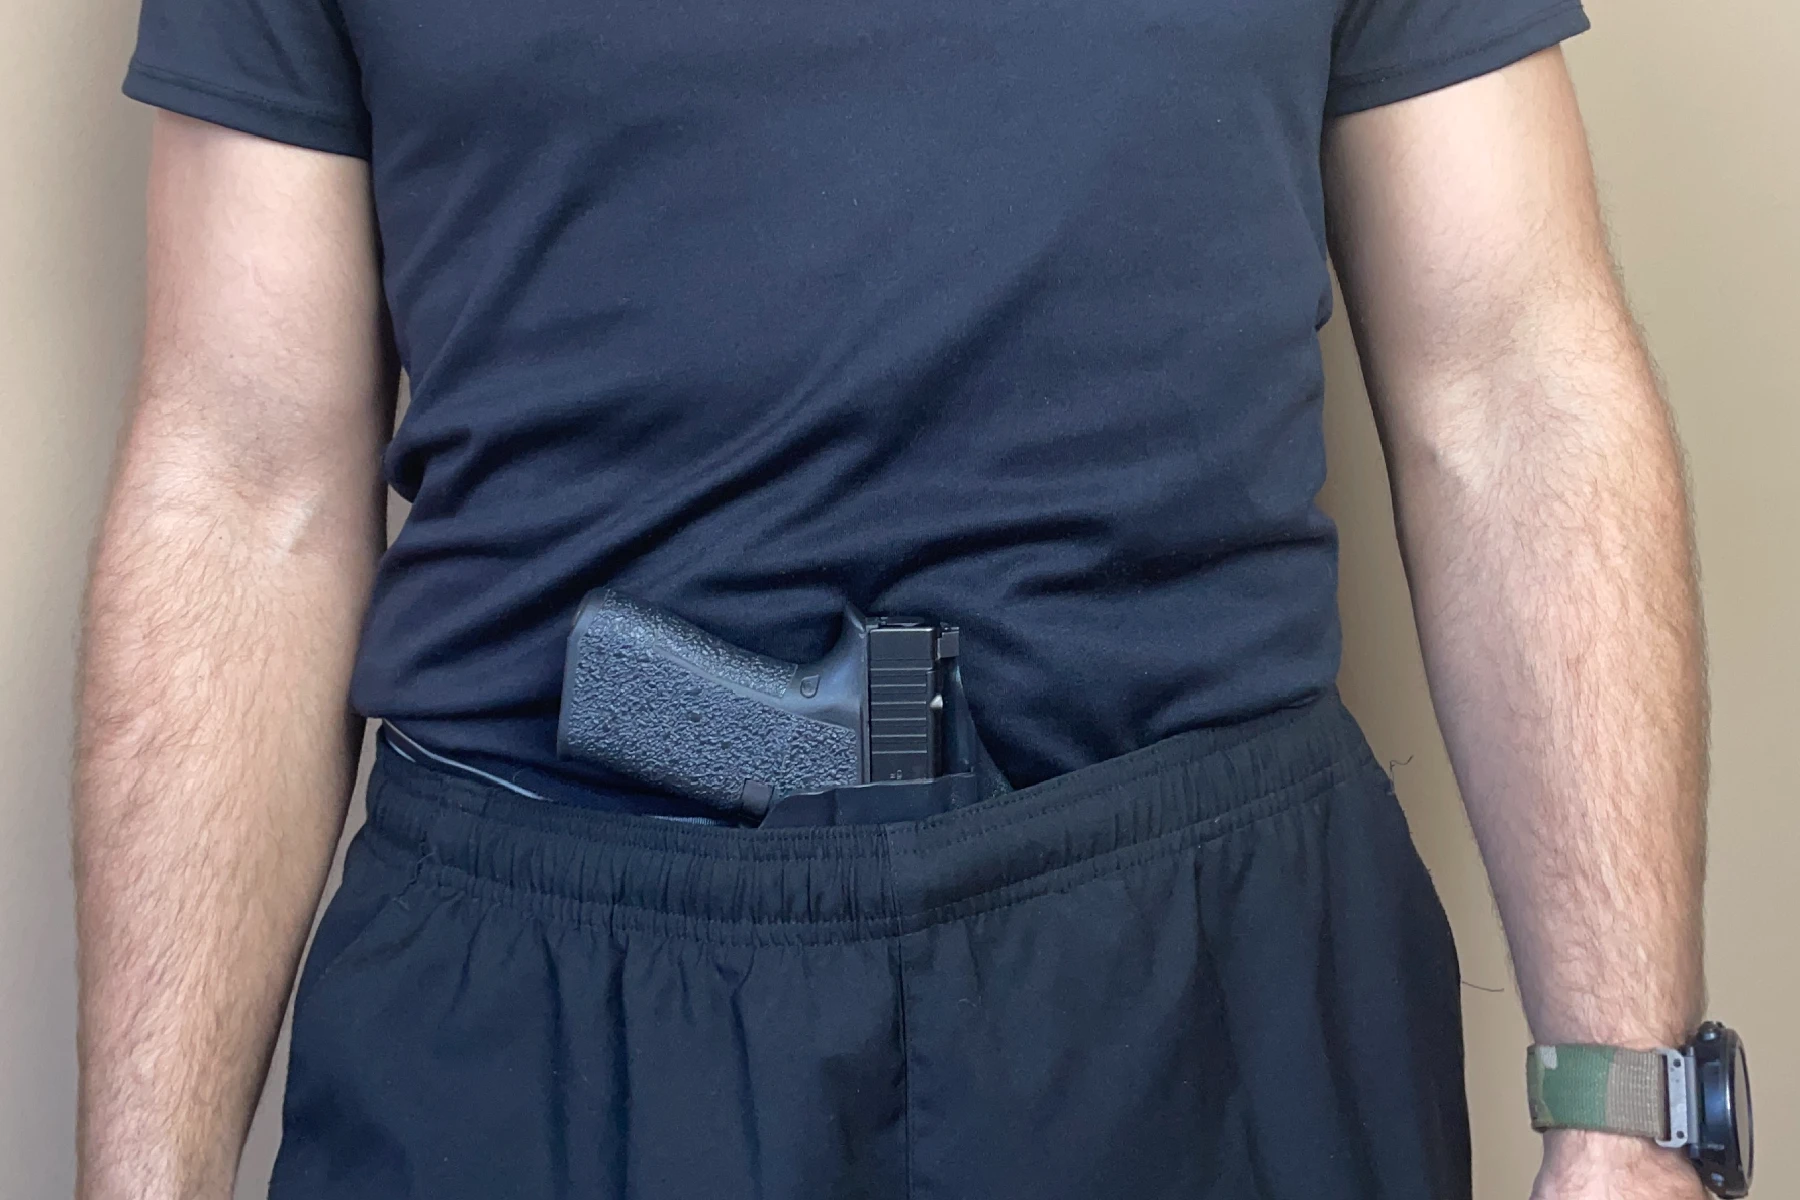 How to wear Belly Band Holster